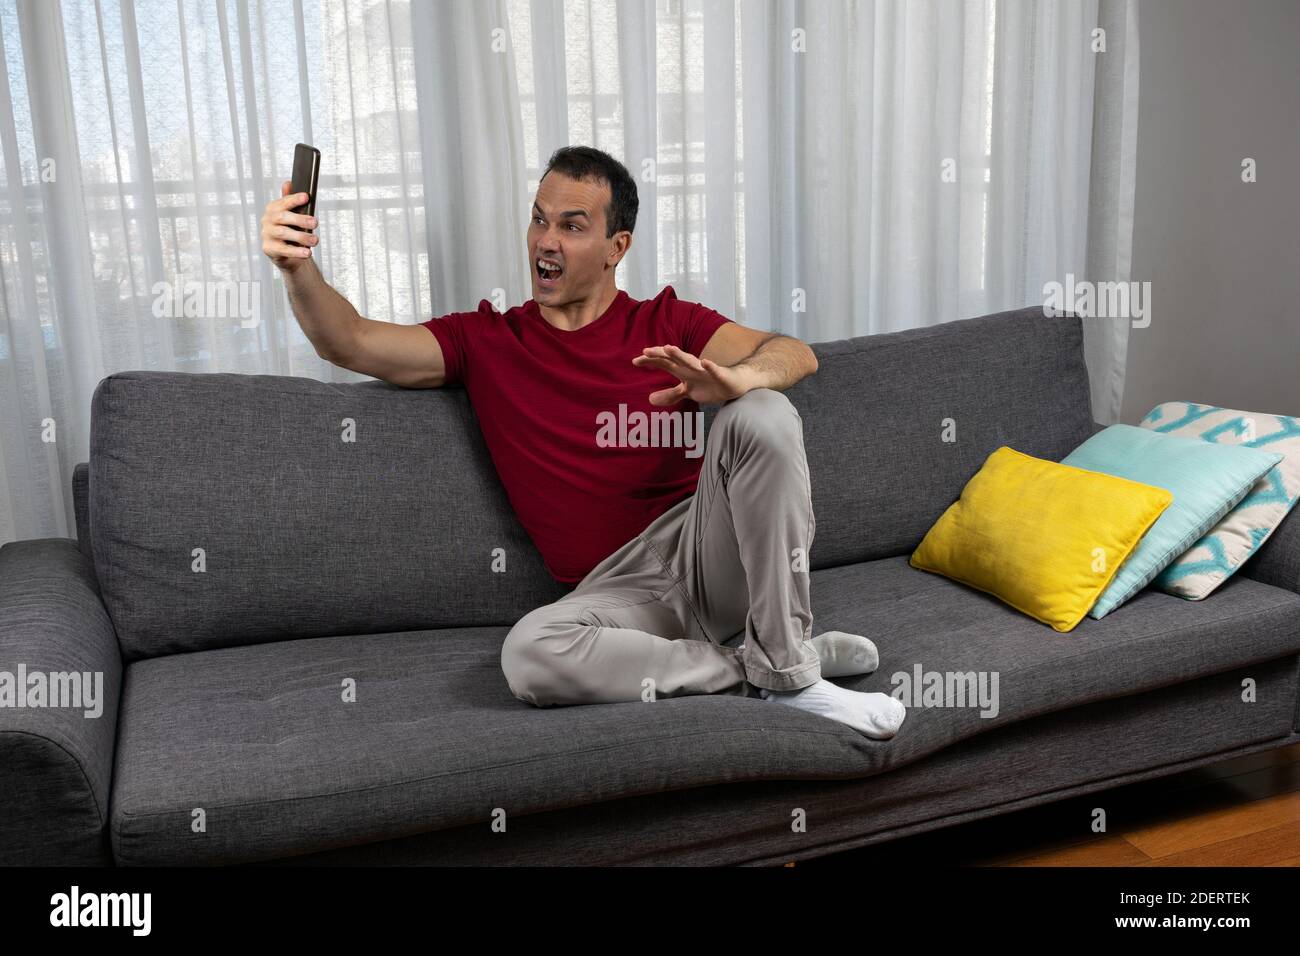 Mature man (44 years old) sitting on the couch and taking a picture of his grimace. Stock Photo